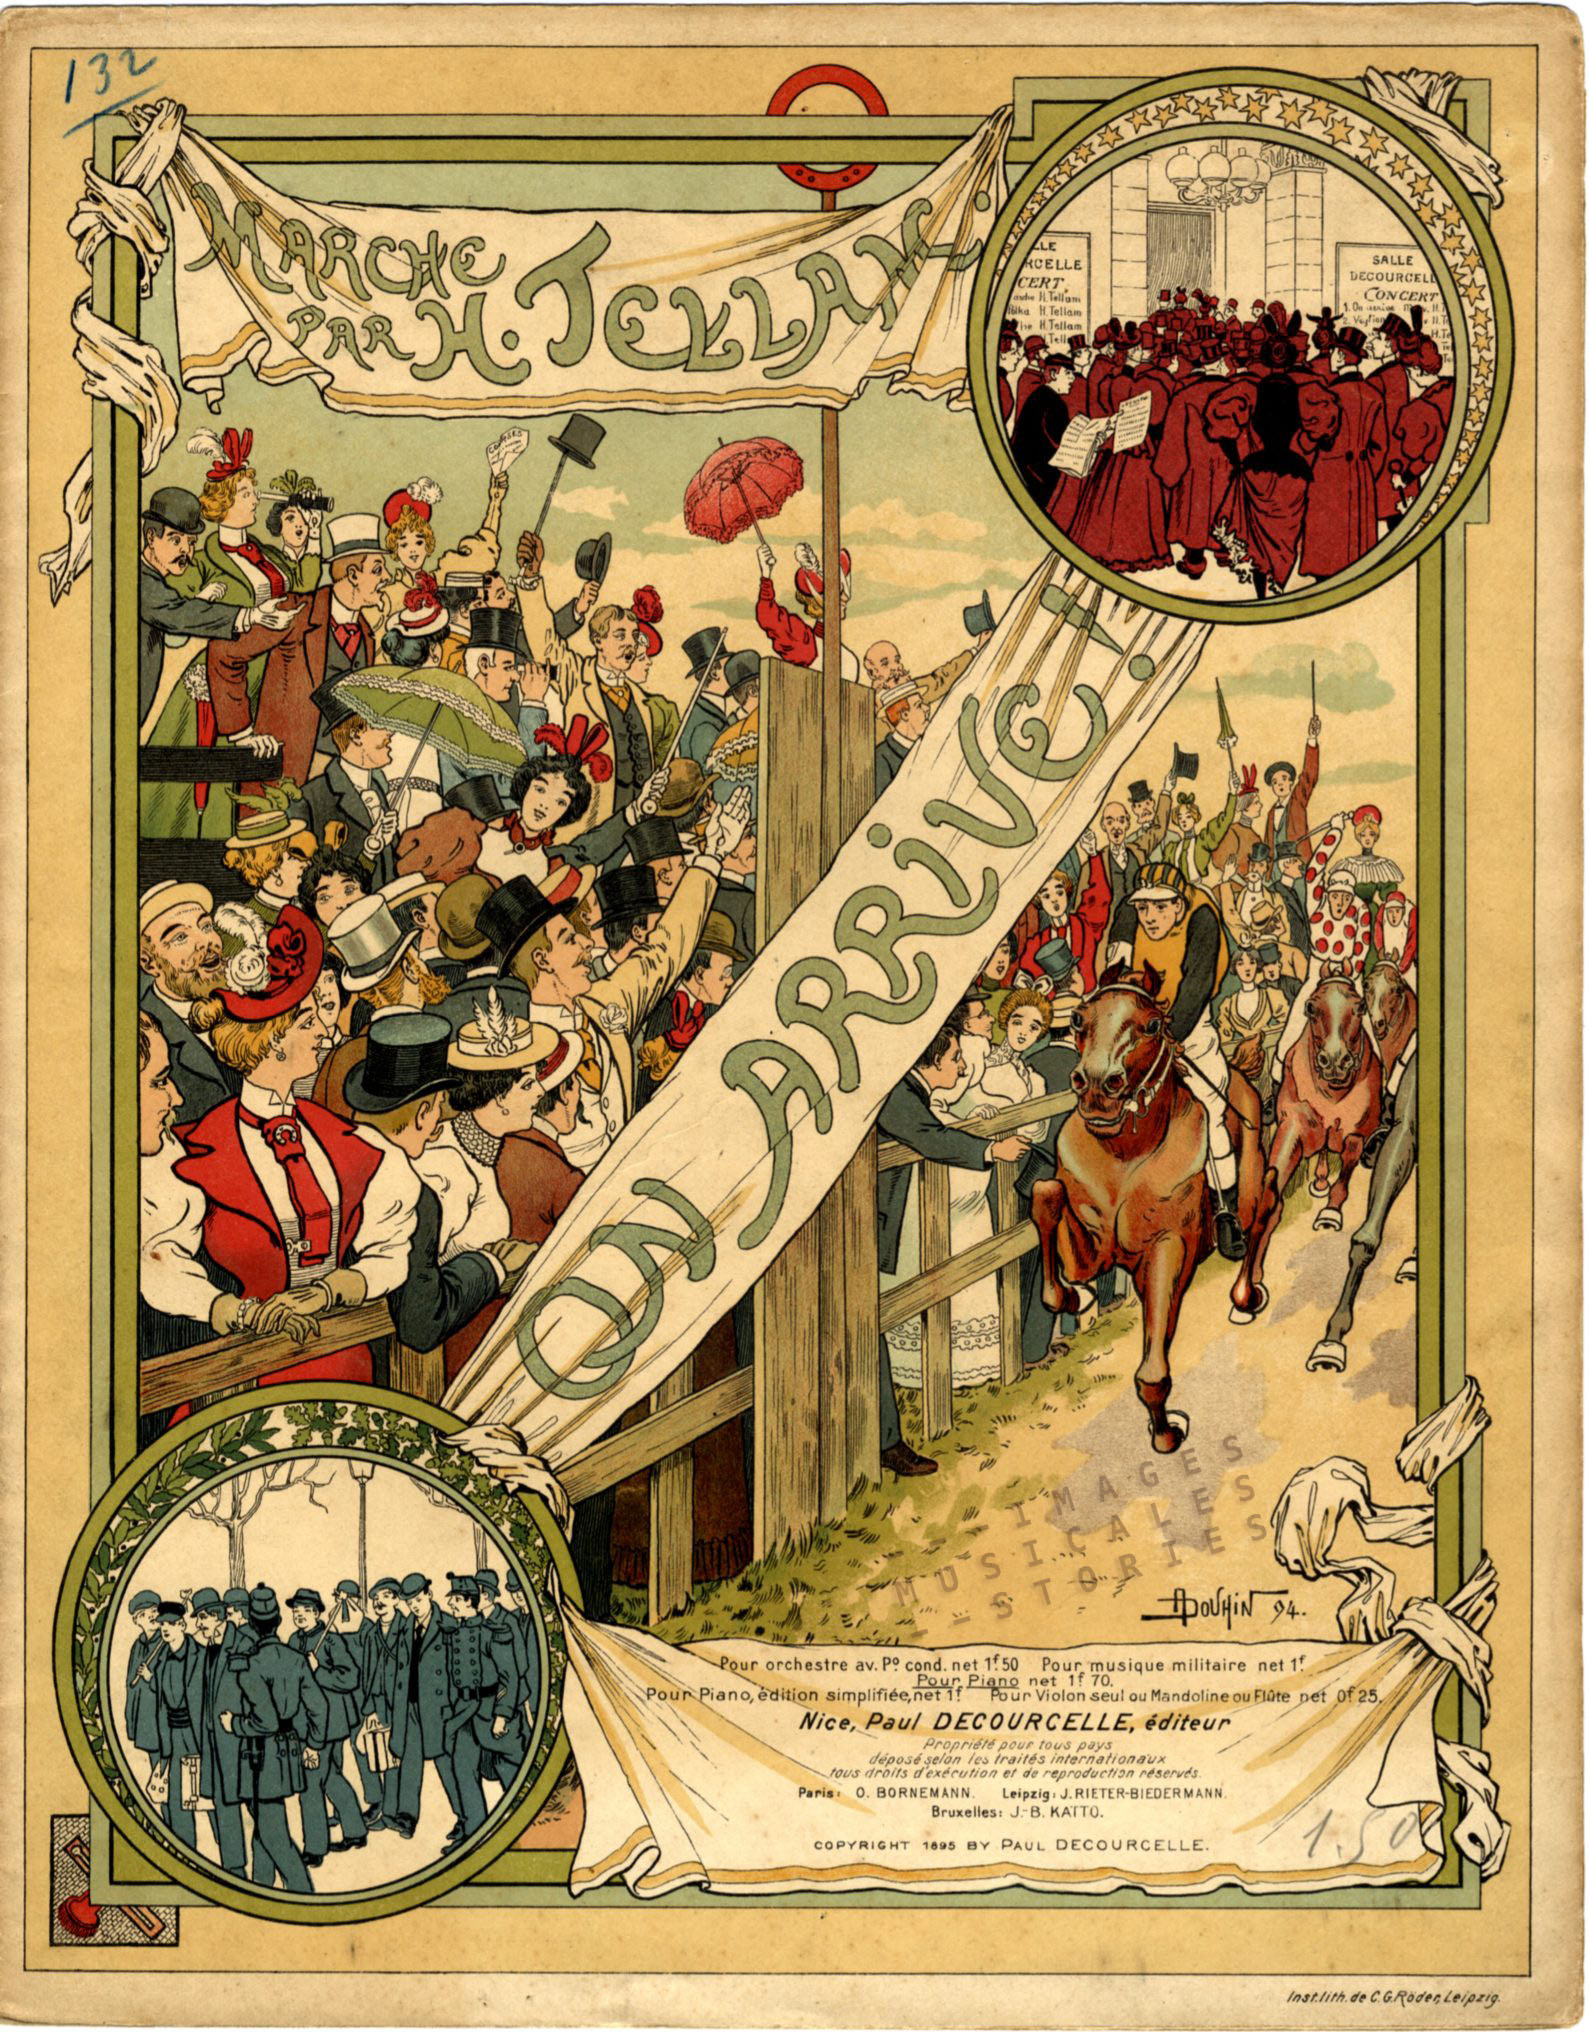 'On arrive' by H. Tellam (1895). Sheet music illustrated by André Douhin.